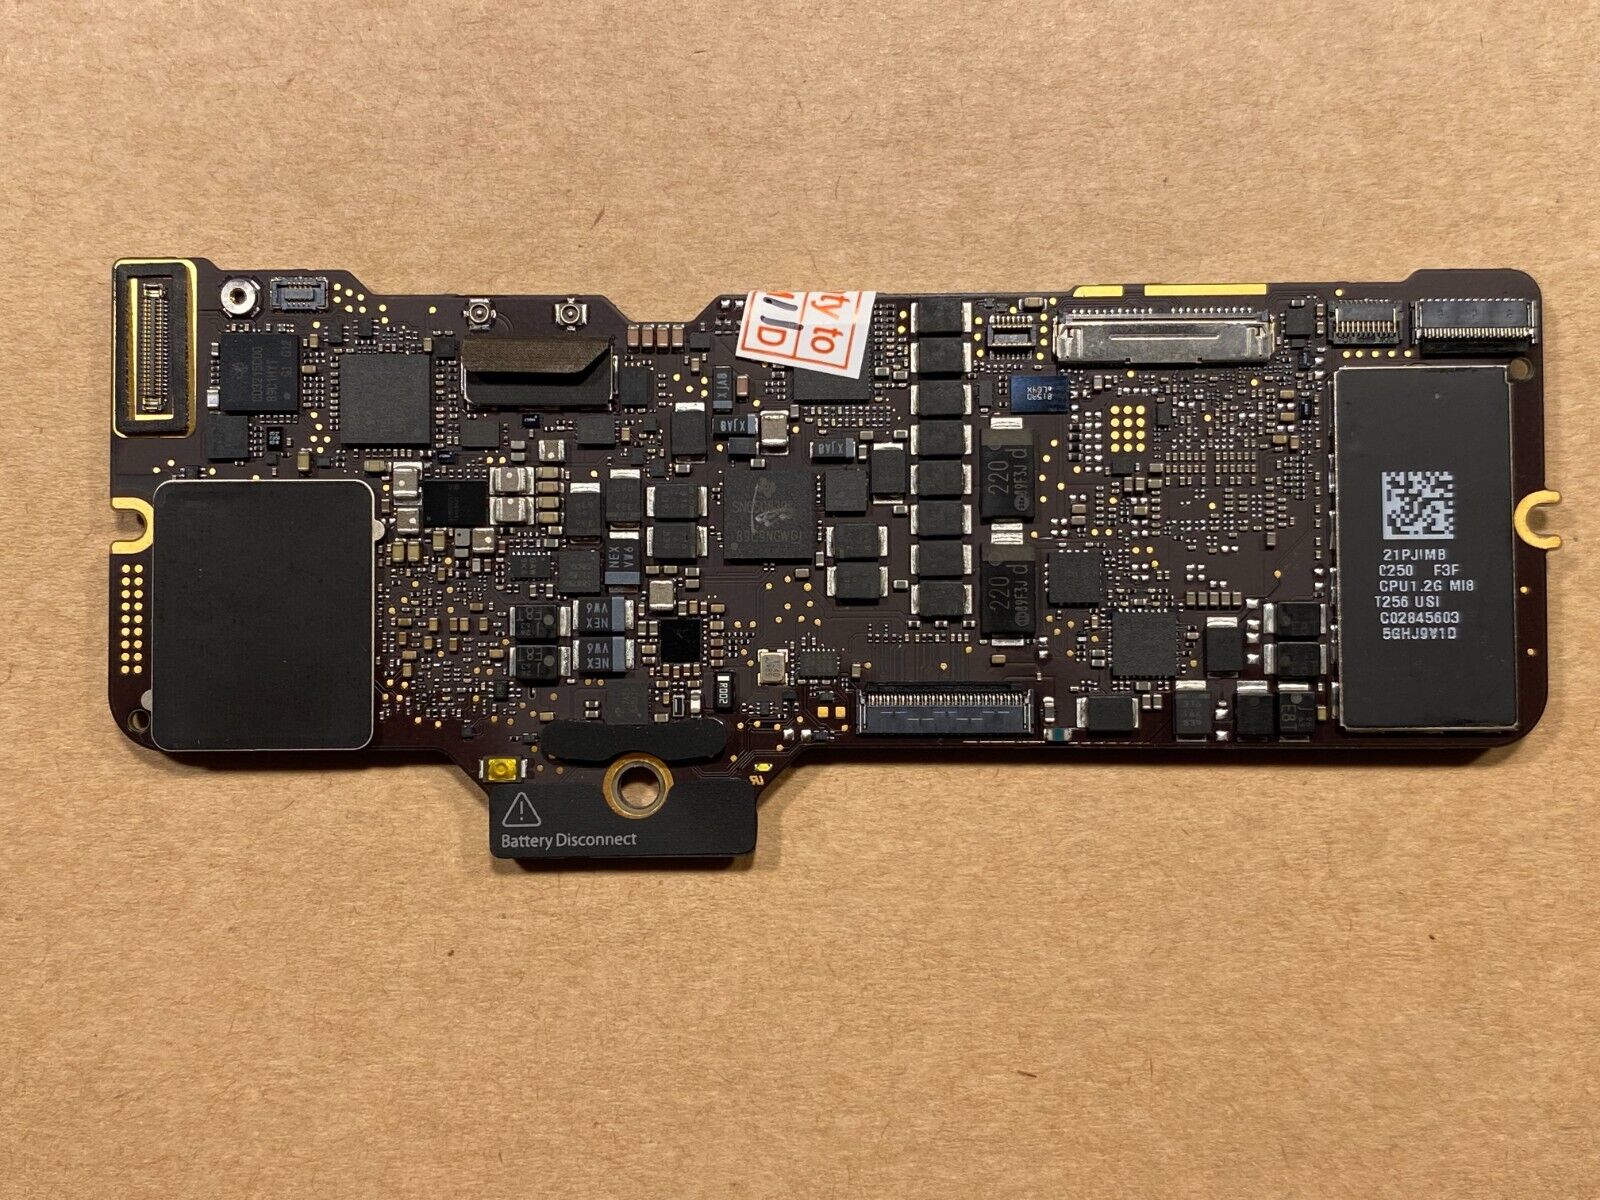 NEW MacBook 12 A1534 2017 2016 Logic Board Core M3 1.2GHz 8GB 256GB 820-00687-B. Available Now for $159.99